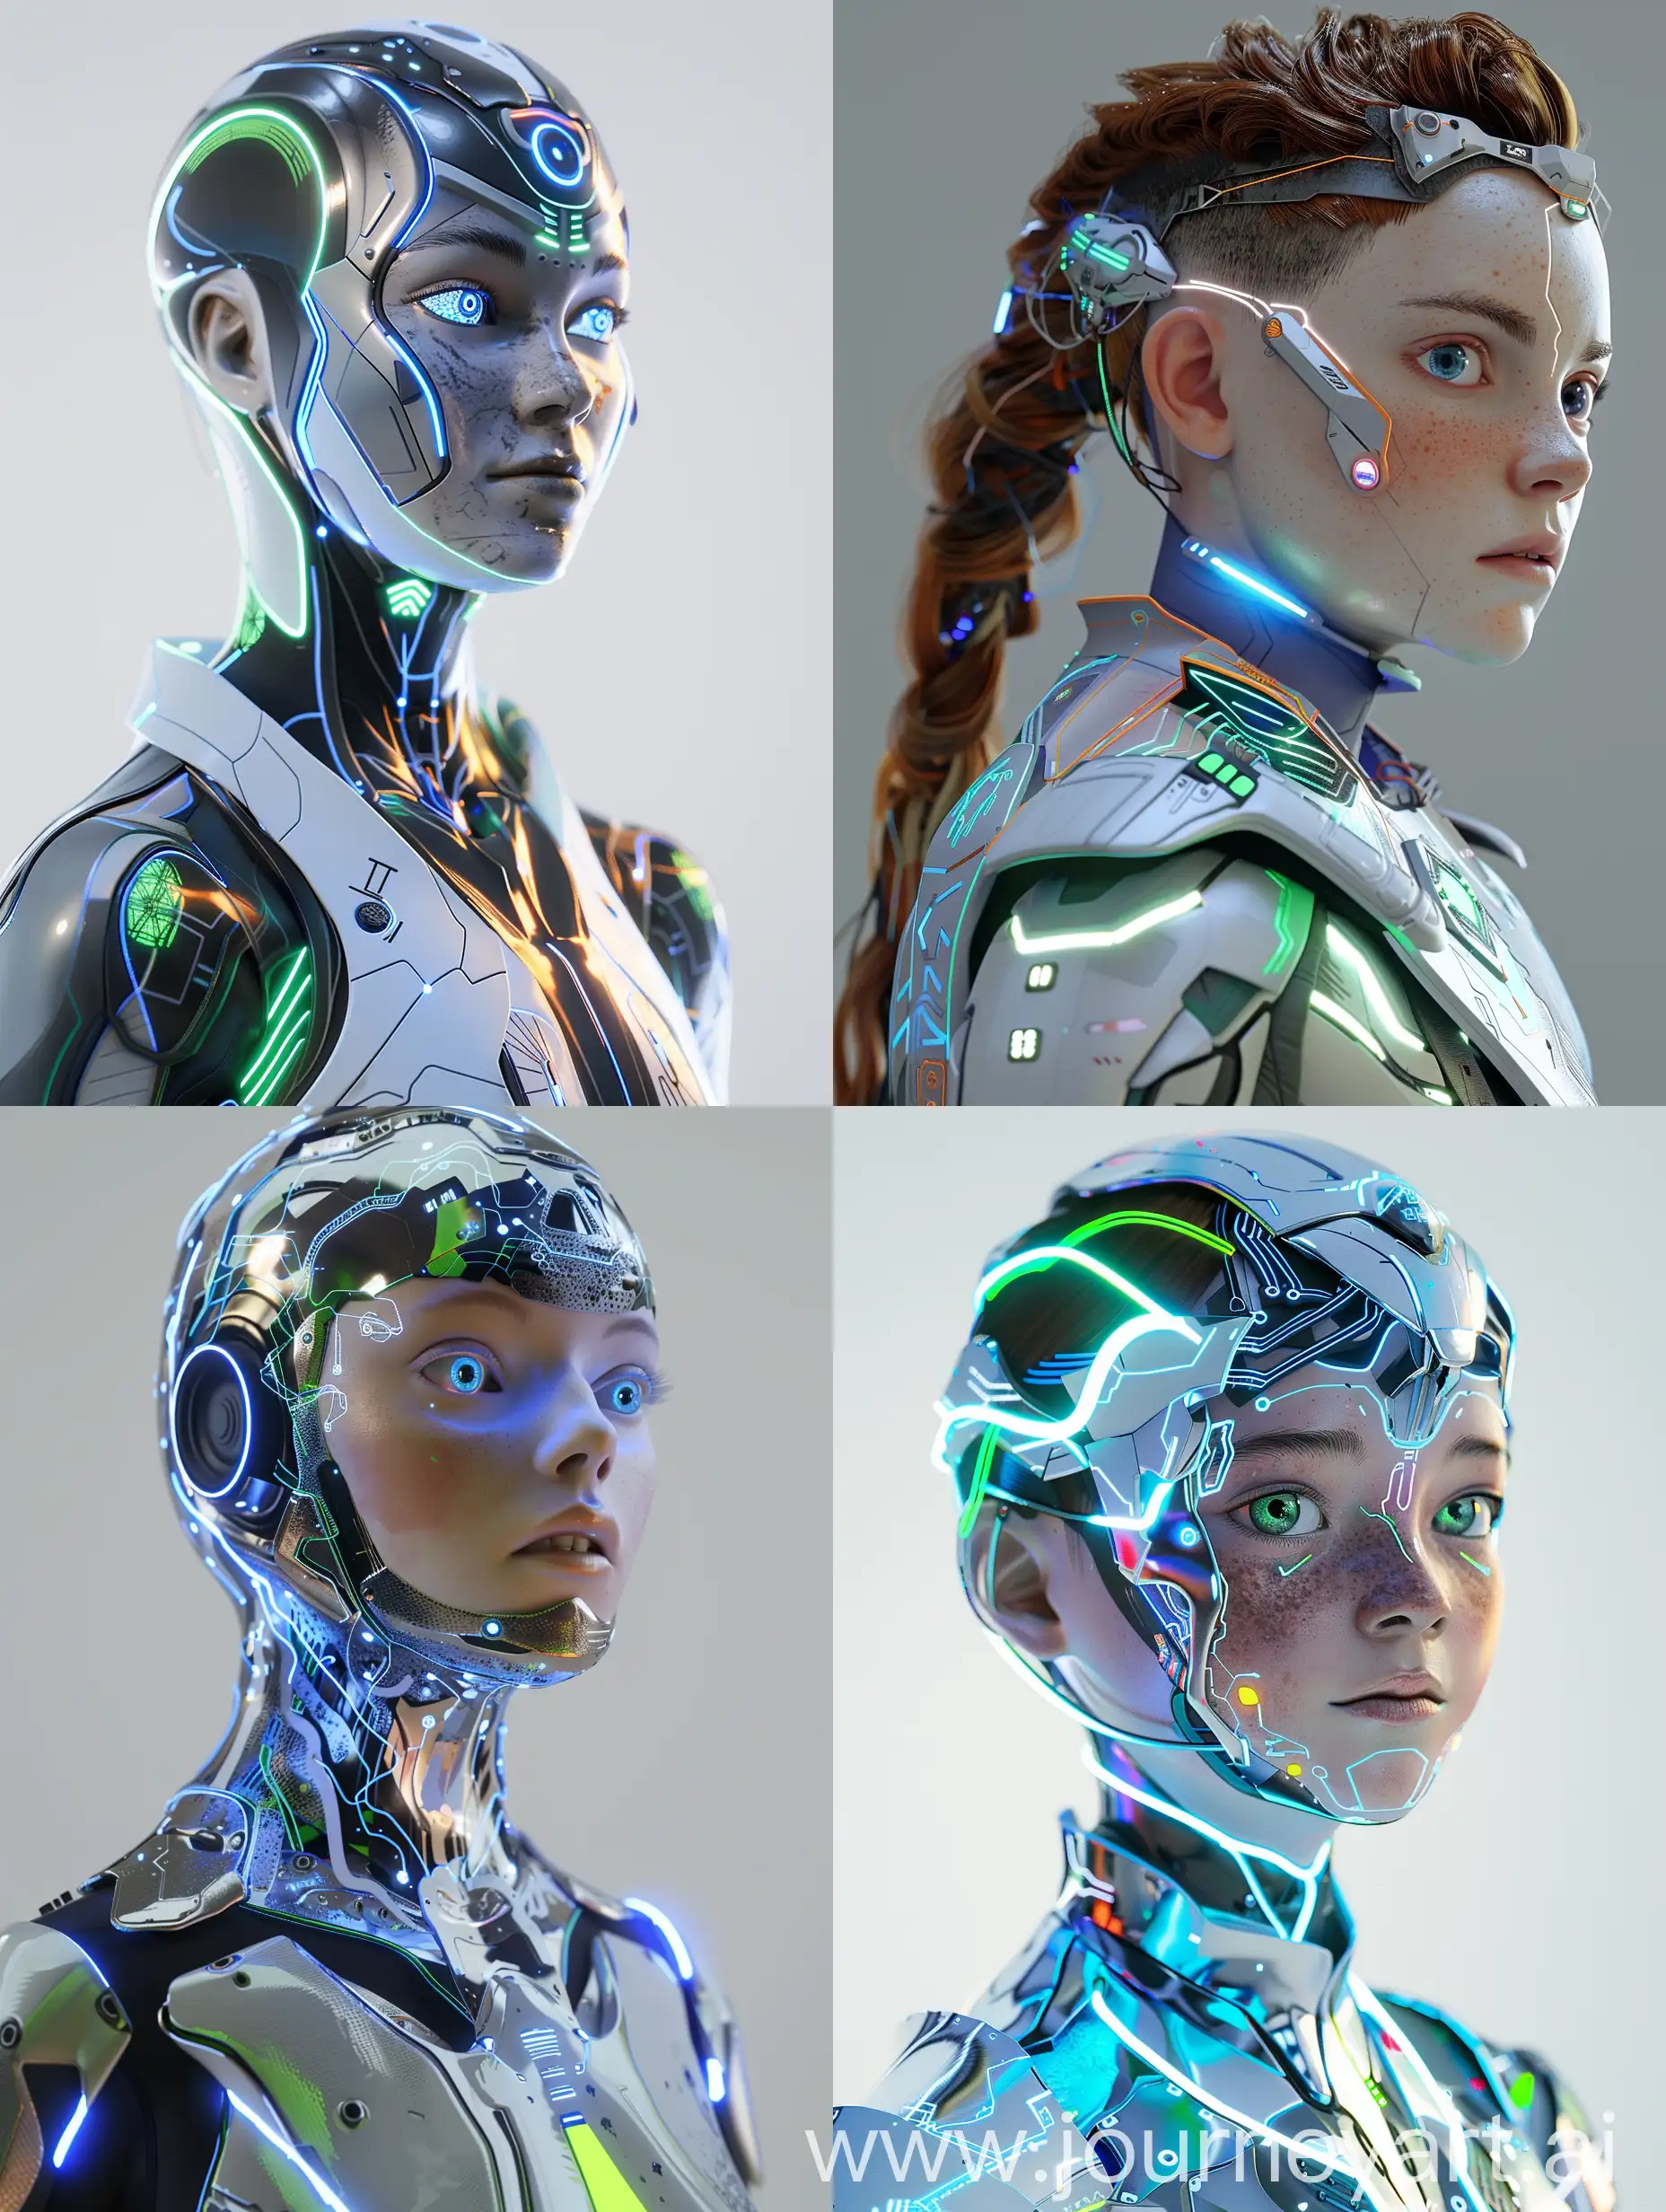 "Create a 3D character named Aurora , inspired by 'Horizon: Zero Dawn' and 'Ghost in the Shell.' Aurora should be an androgynous character representing timeless wisdom and youth, with a futuristic humanoid appearance blending natural elements. Use a color palette of metallic silver (#C0C0C0), deep blue (#1E3A8A), neon blue (#00FFFF), neon green (#39FF14), and bioluminescent soft white (#F5F5F5). Aurora's face should have sleek, expressive eyes with subtle technology integration, and the body should feature an elegant, streamlined design with bioluminescent elements and nature motifs. Include subtle technological enhancements like glowing circuits. Ensure the design is visually appealing in both light and dark modes, and implement smooth, precise movements with glowing pulses to reflect thought and creativity."